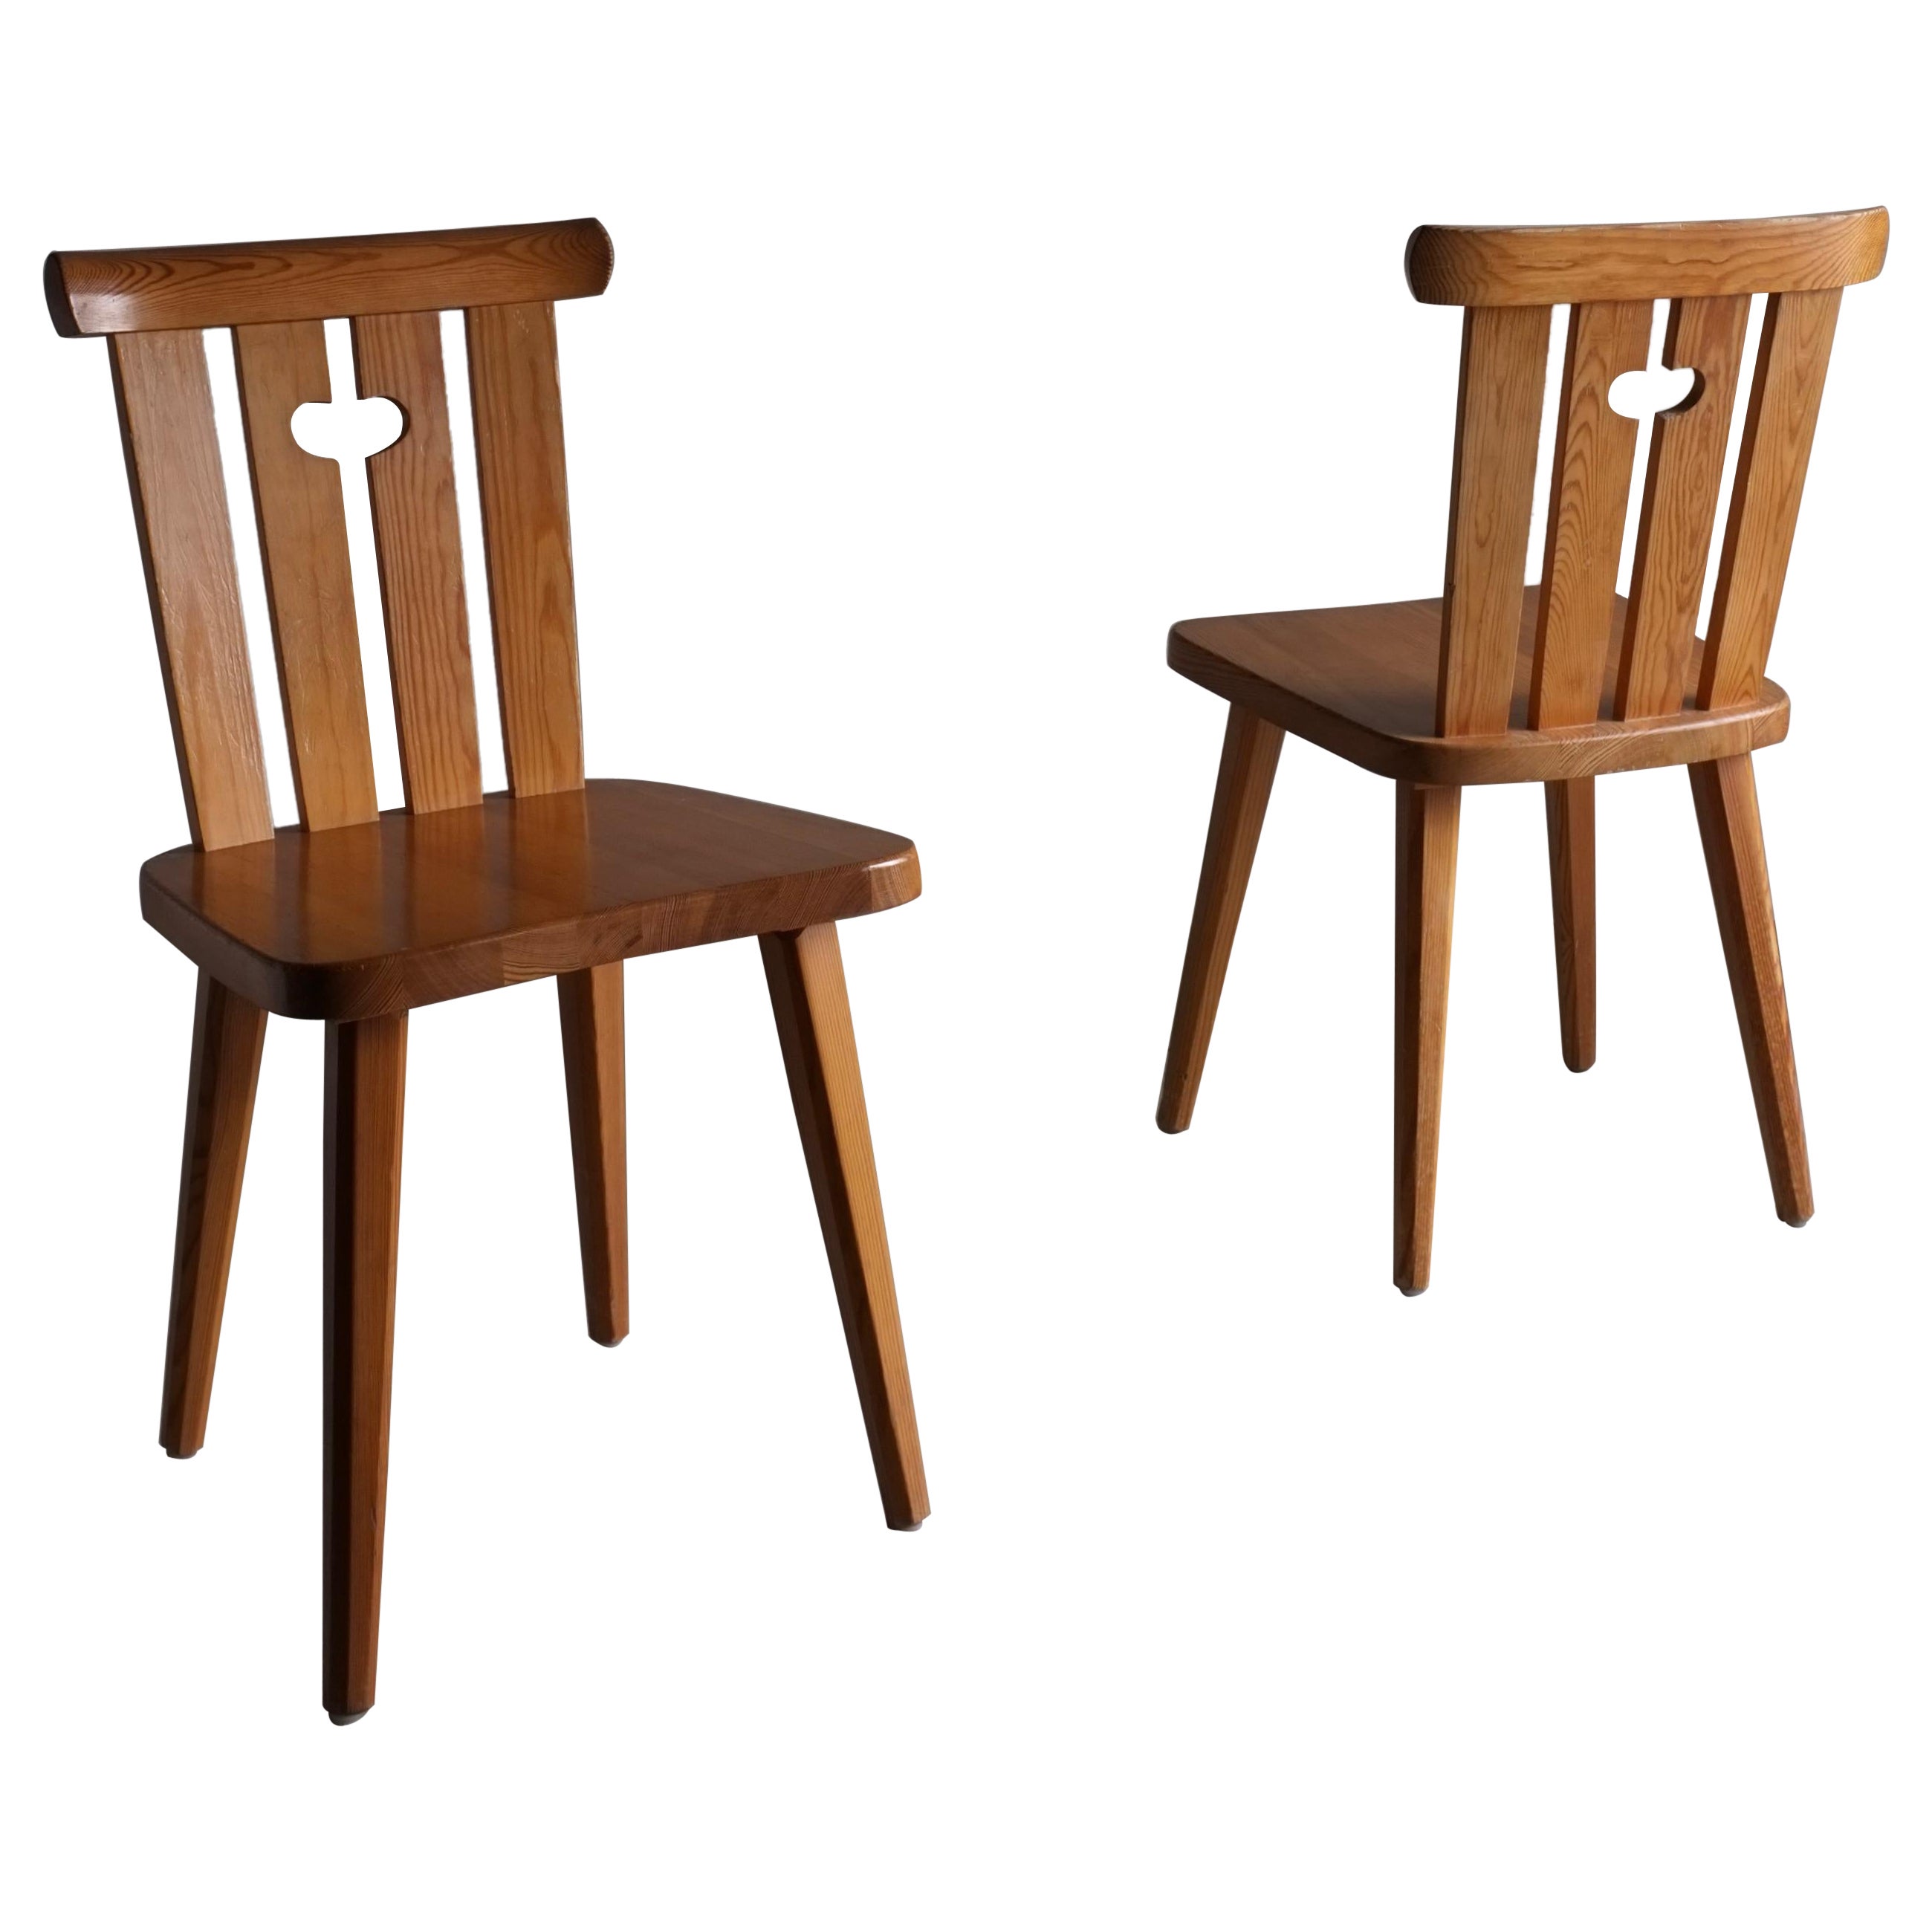 Set of 2 Solid Pine Chairs, Göran Malmvall, Sweden 1940s